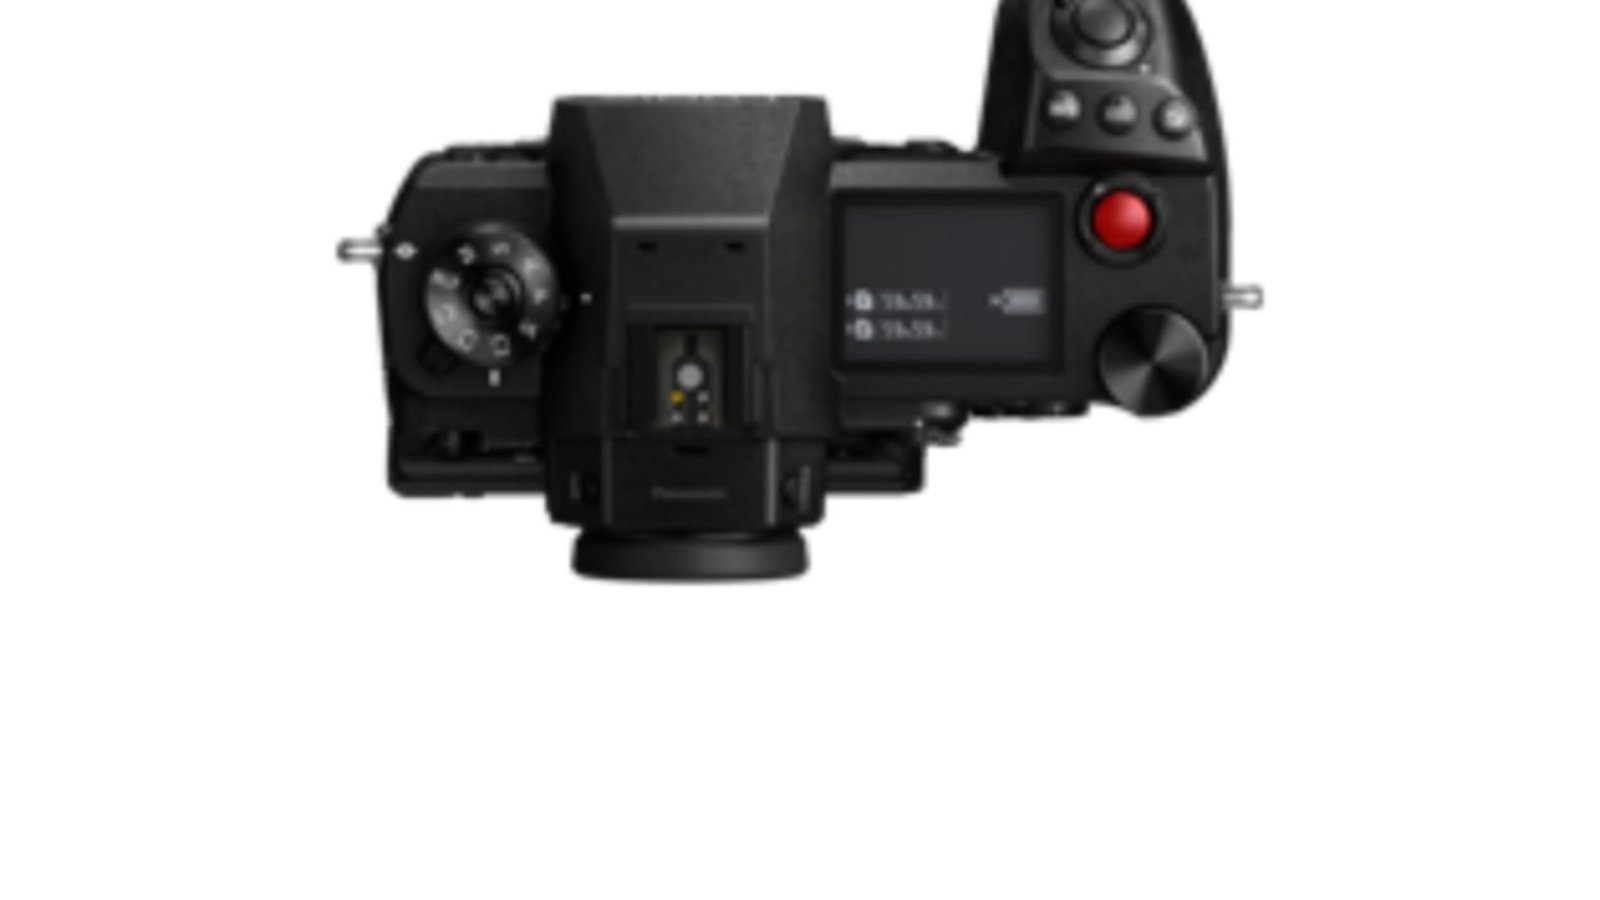 Rent Panasonic Lumix S1H Camera with Cp.2 Lens Kit in Delhi NCR, Rent Camera, Camera accessories, Camera lenses for rent, in Delhi Gurgaon Noida, hire Shooting equipment, Lighting equipment rental, Film gear rental for Video production, camera rental company in Delhi, film equipment rental company